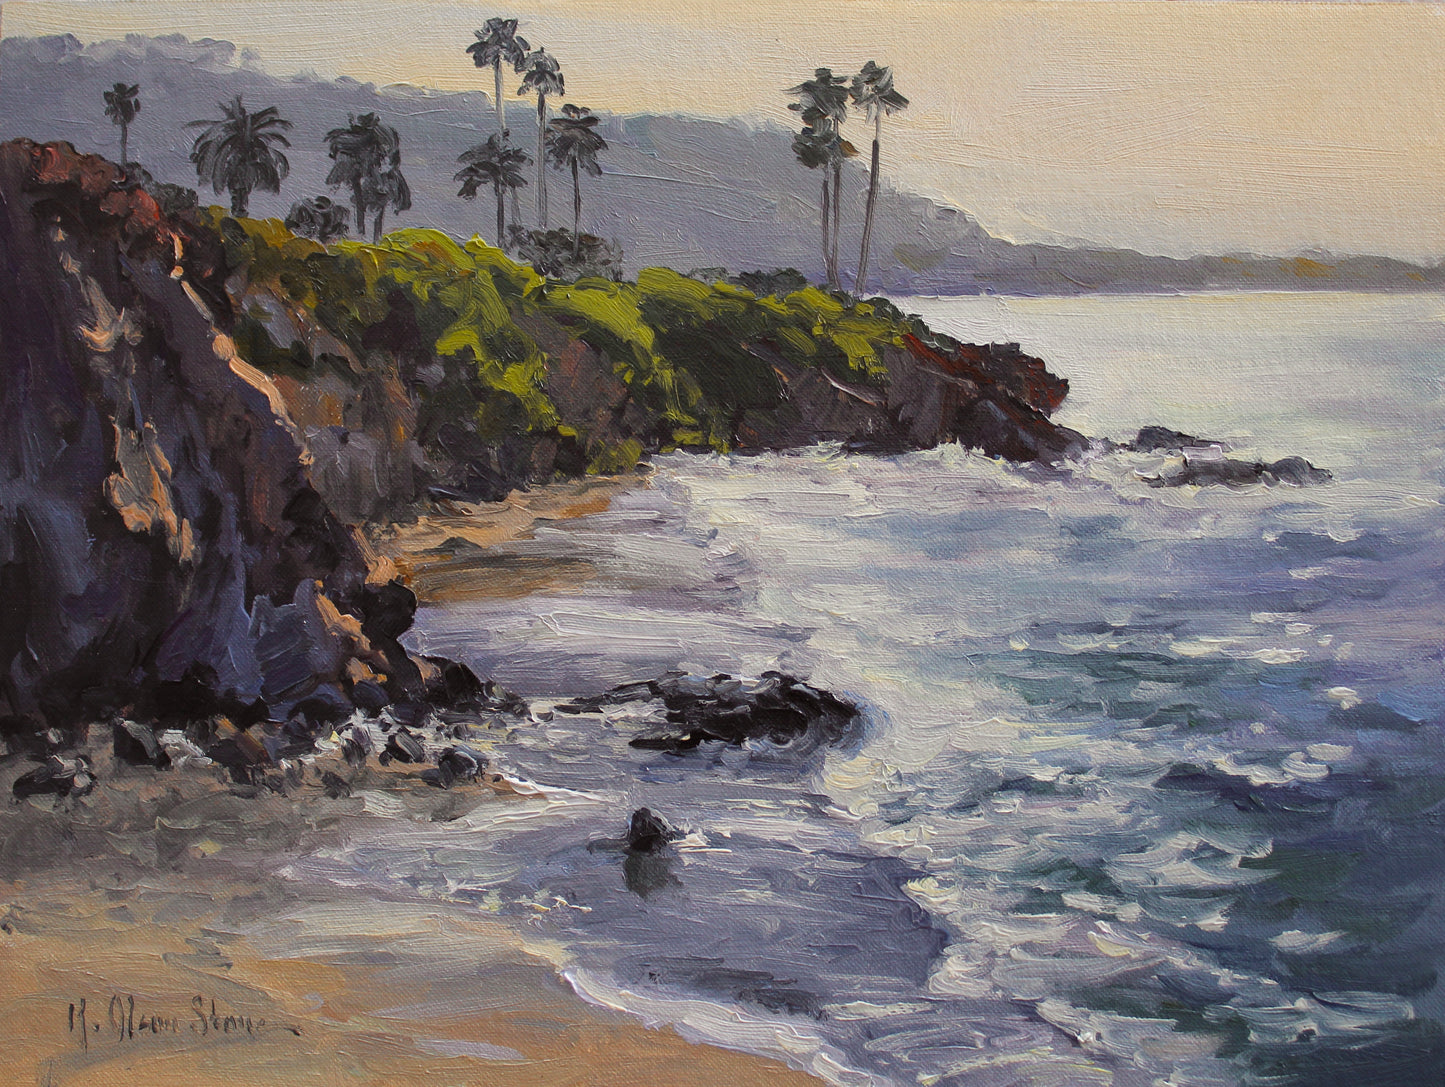 Early Morning, Divers Cove, Heisler Park, plein air oil painting